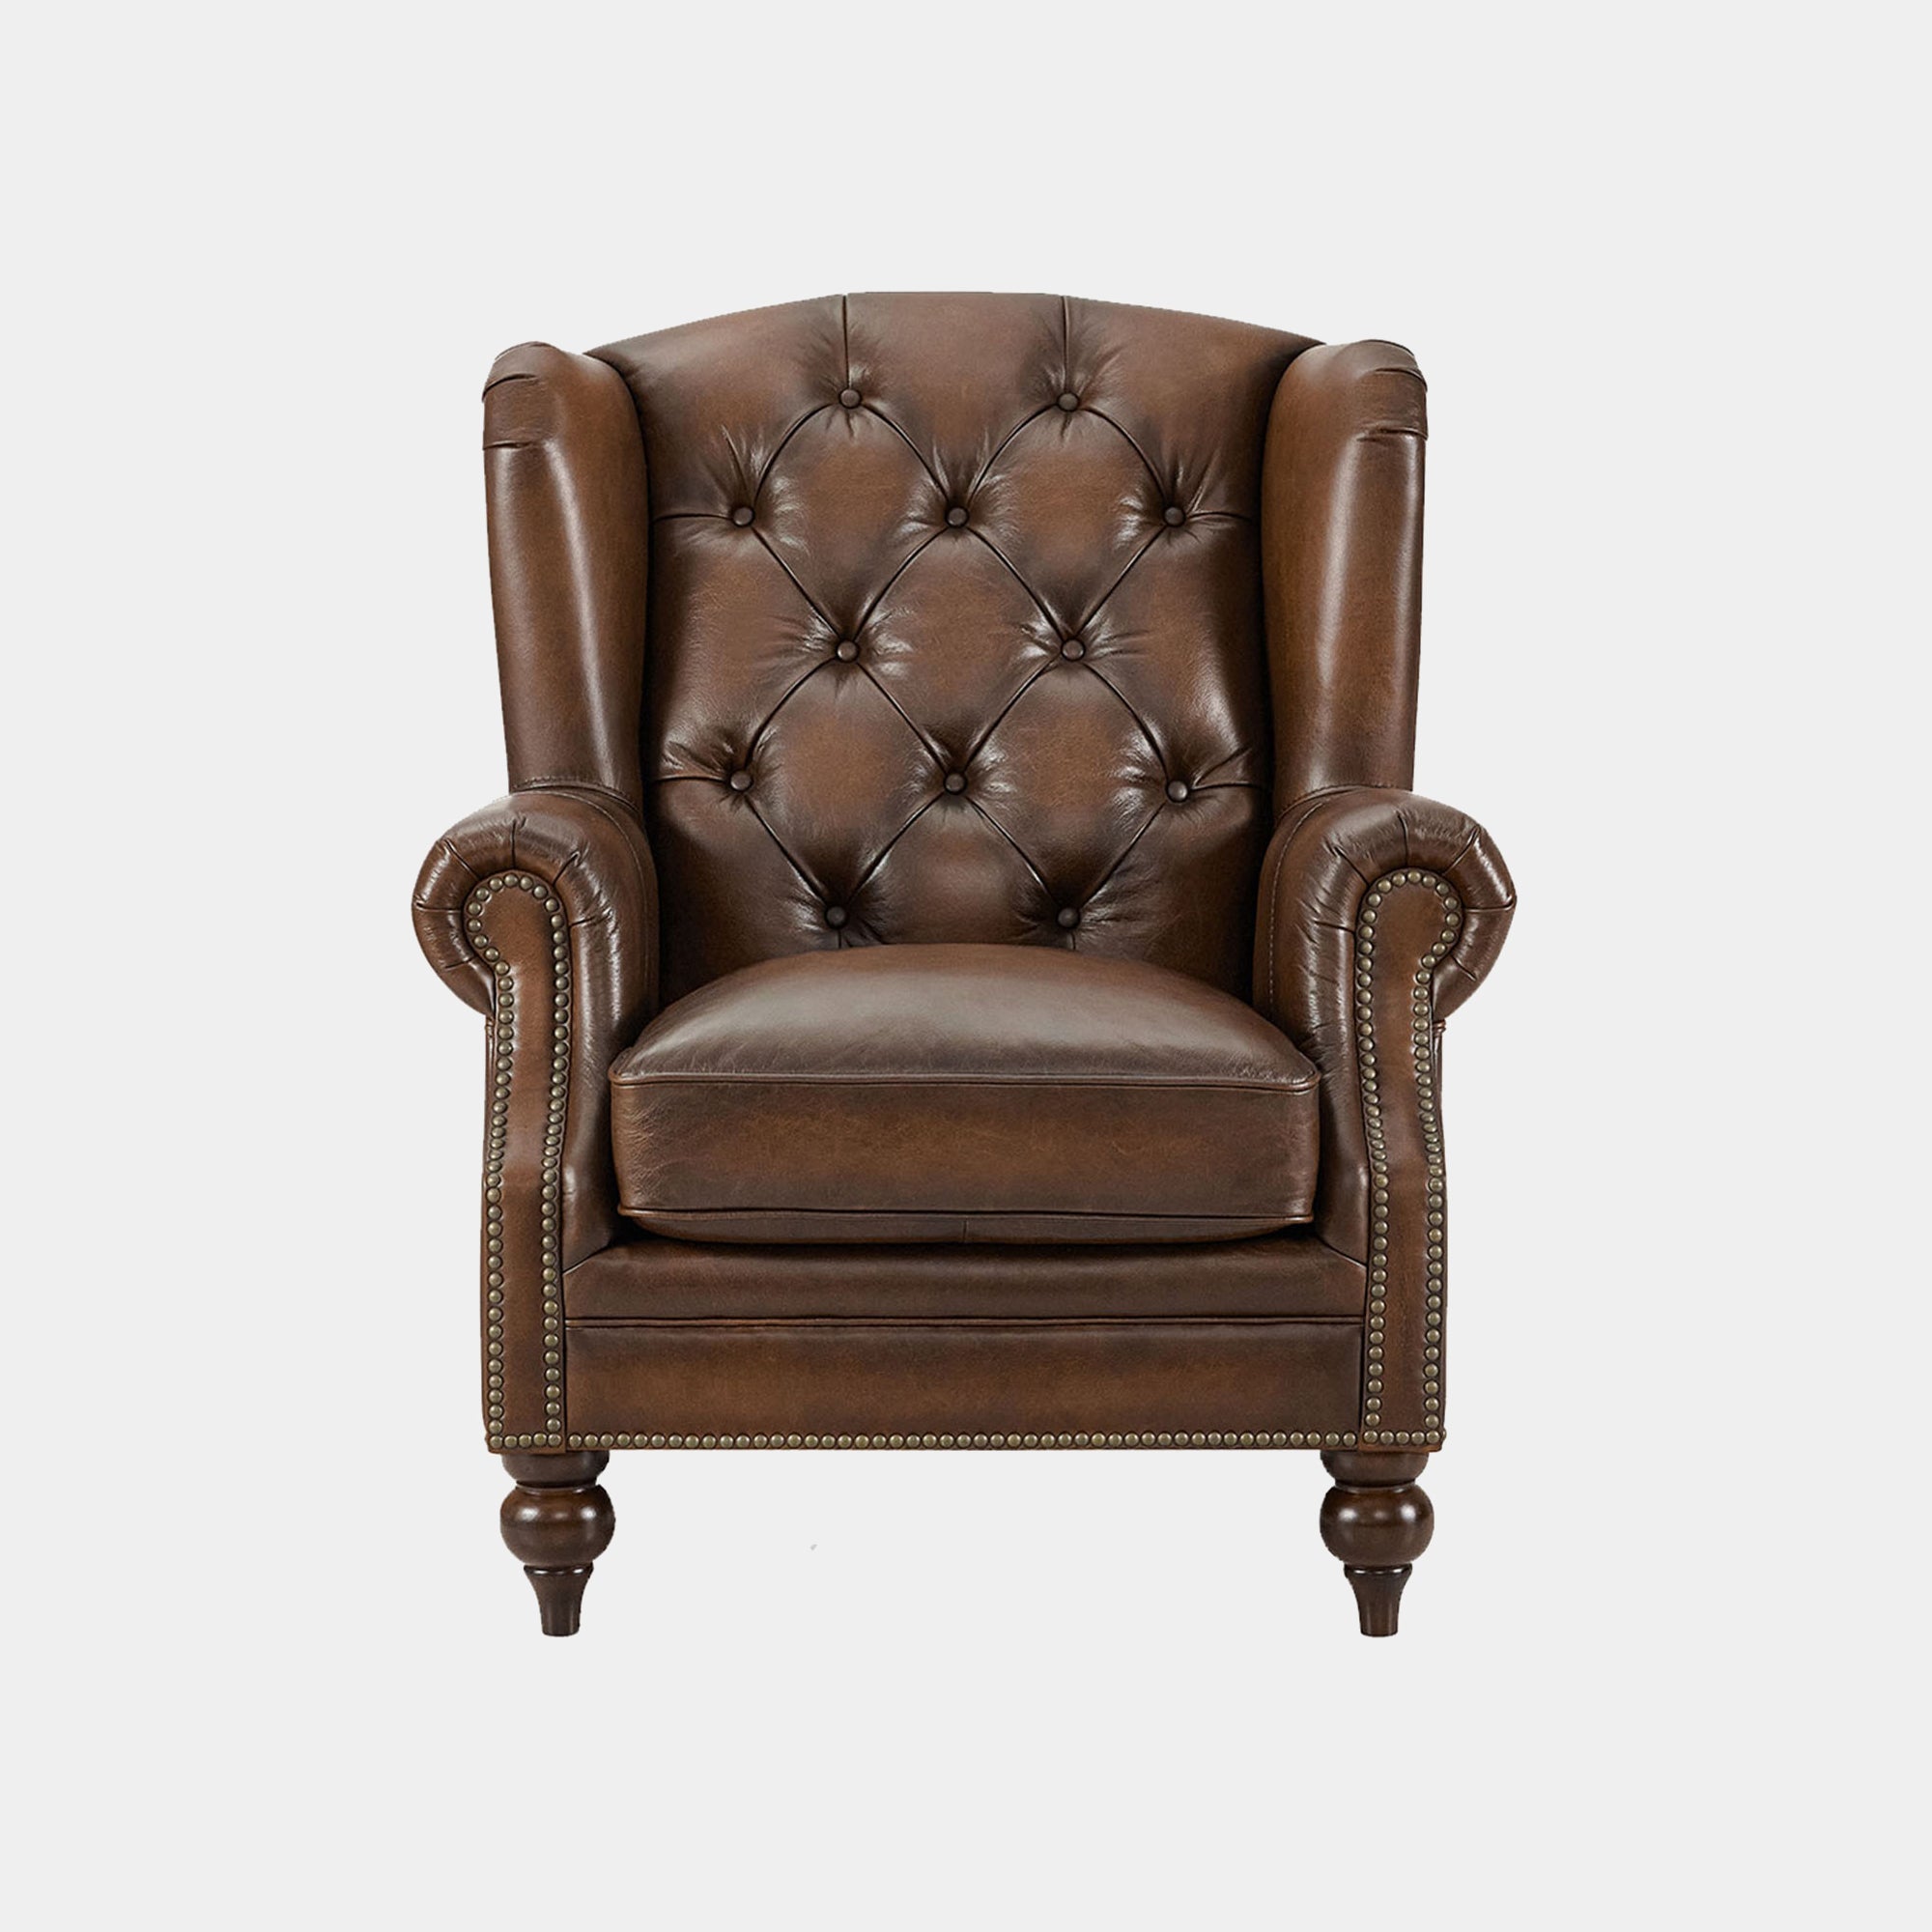 Churchill - Wing Chair In Leather Vintage LLS Cognac 1806/Antique Brass Studs With Mahogany Feet